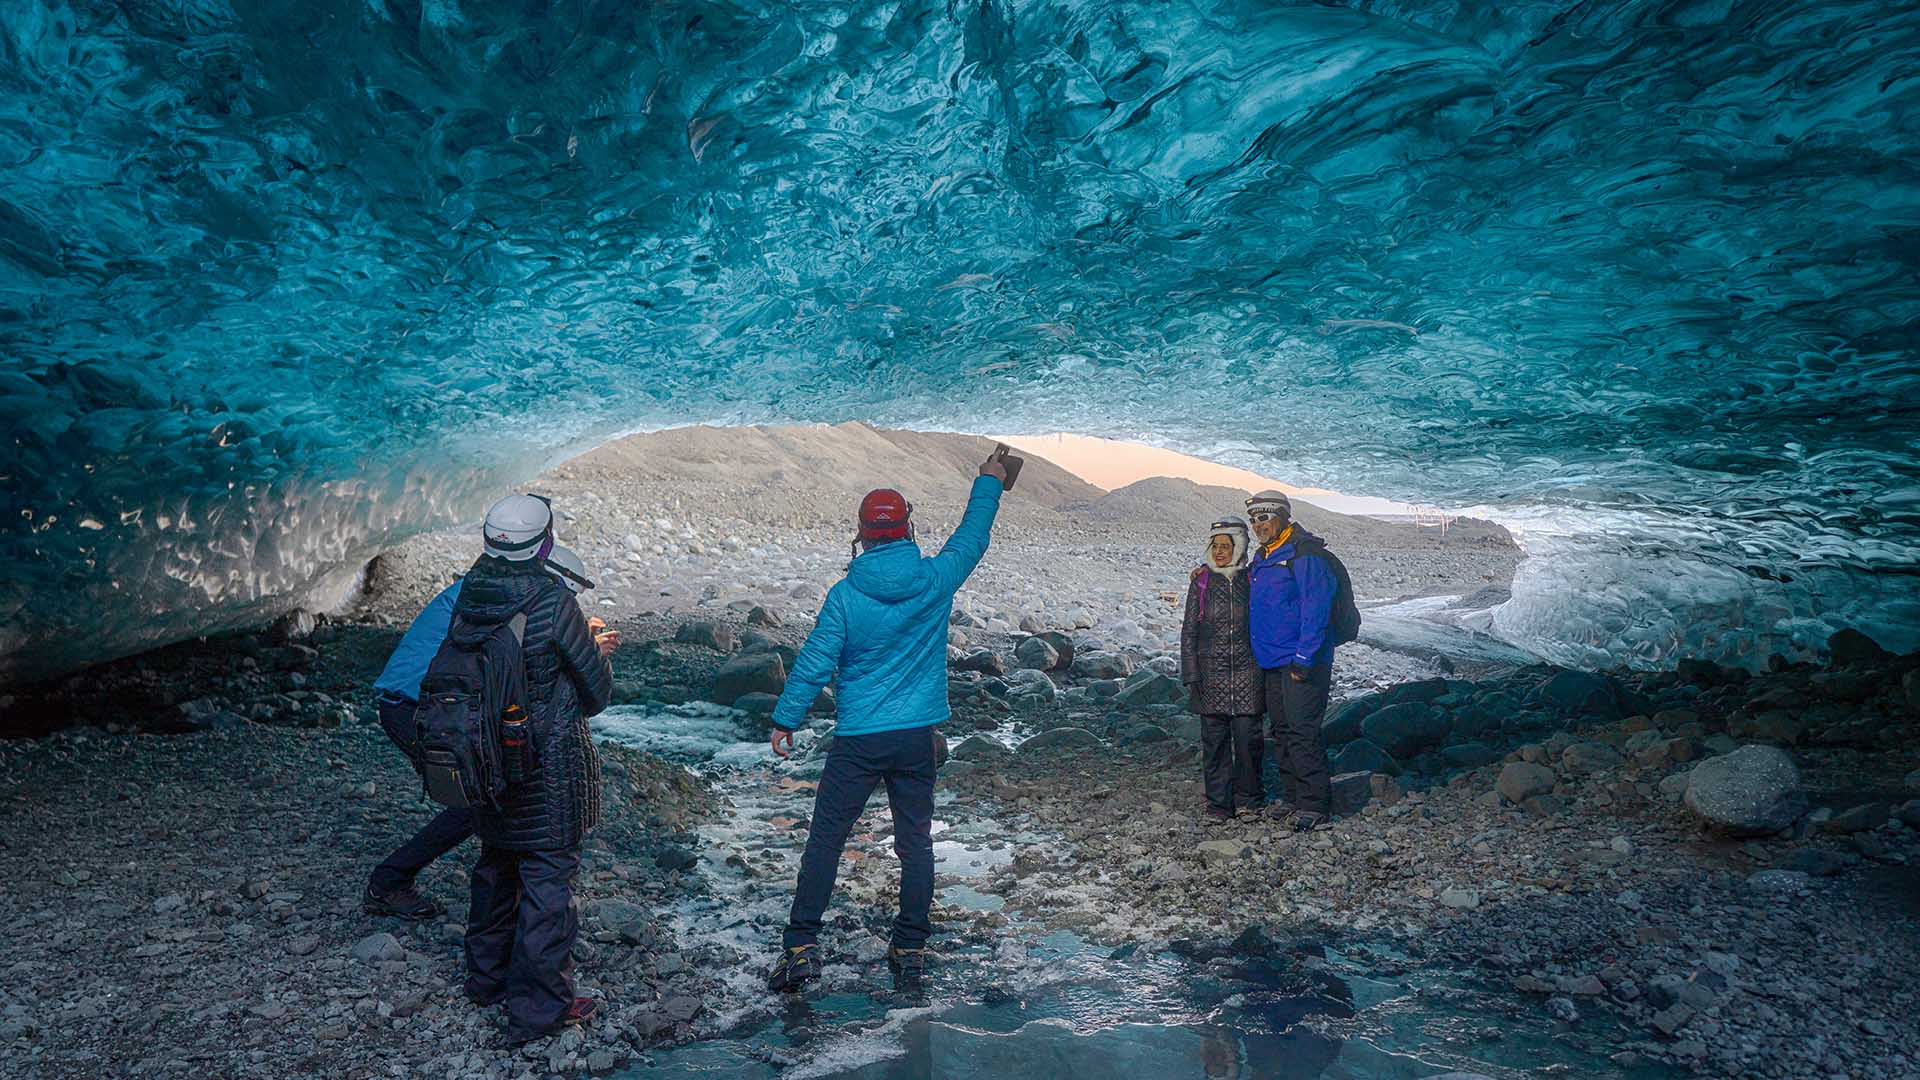 Guided Small Group Tours in Iceland 2022/2023 Nordic Visitor